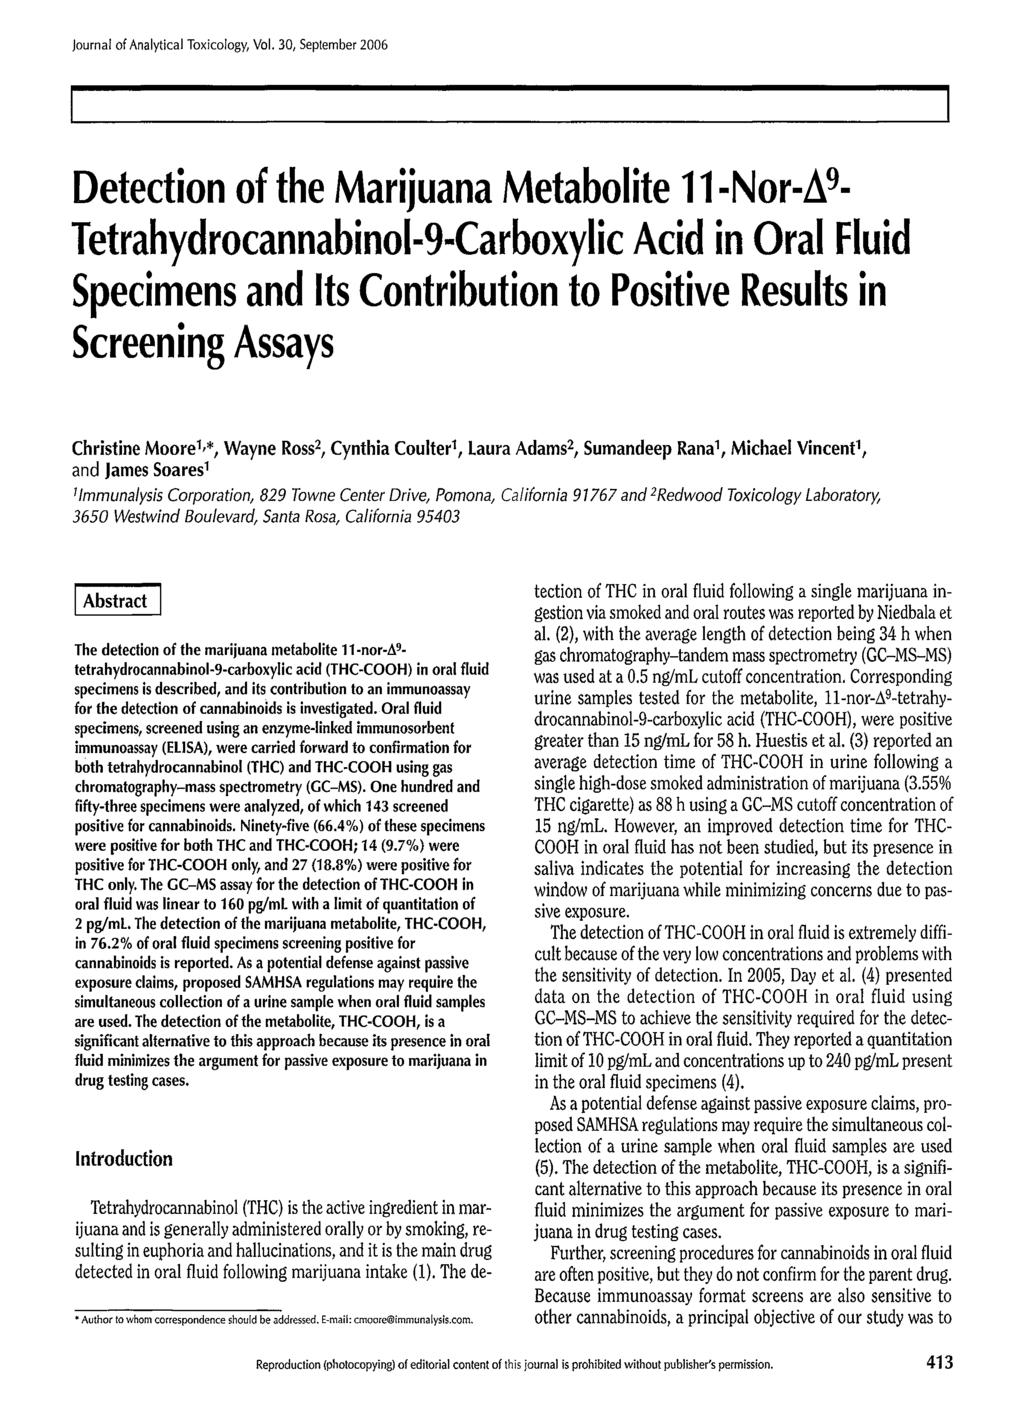 Detection of the Marijuana Metabolite 11-Nor-A9- Tetrahydrocannabinol-9-Carboxylic Acid in Oral Fluid Specimens and Its Contribution to Positive Results in Screening Assays Christine Moore 1,*, Wayne